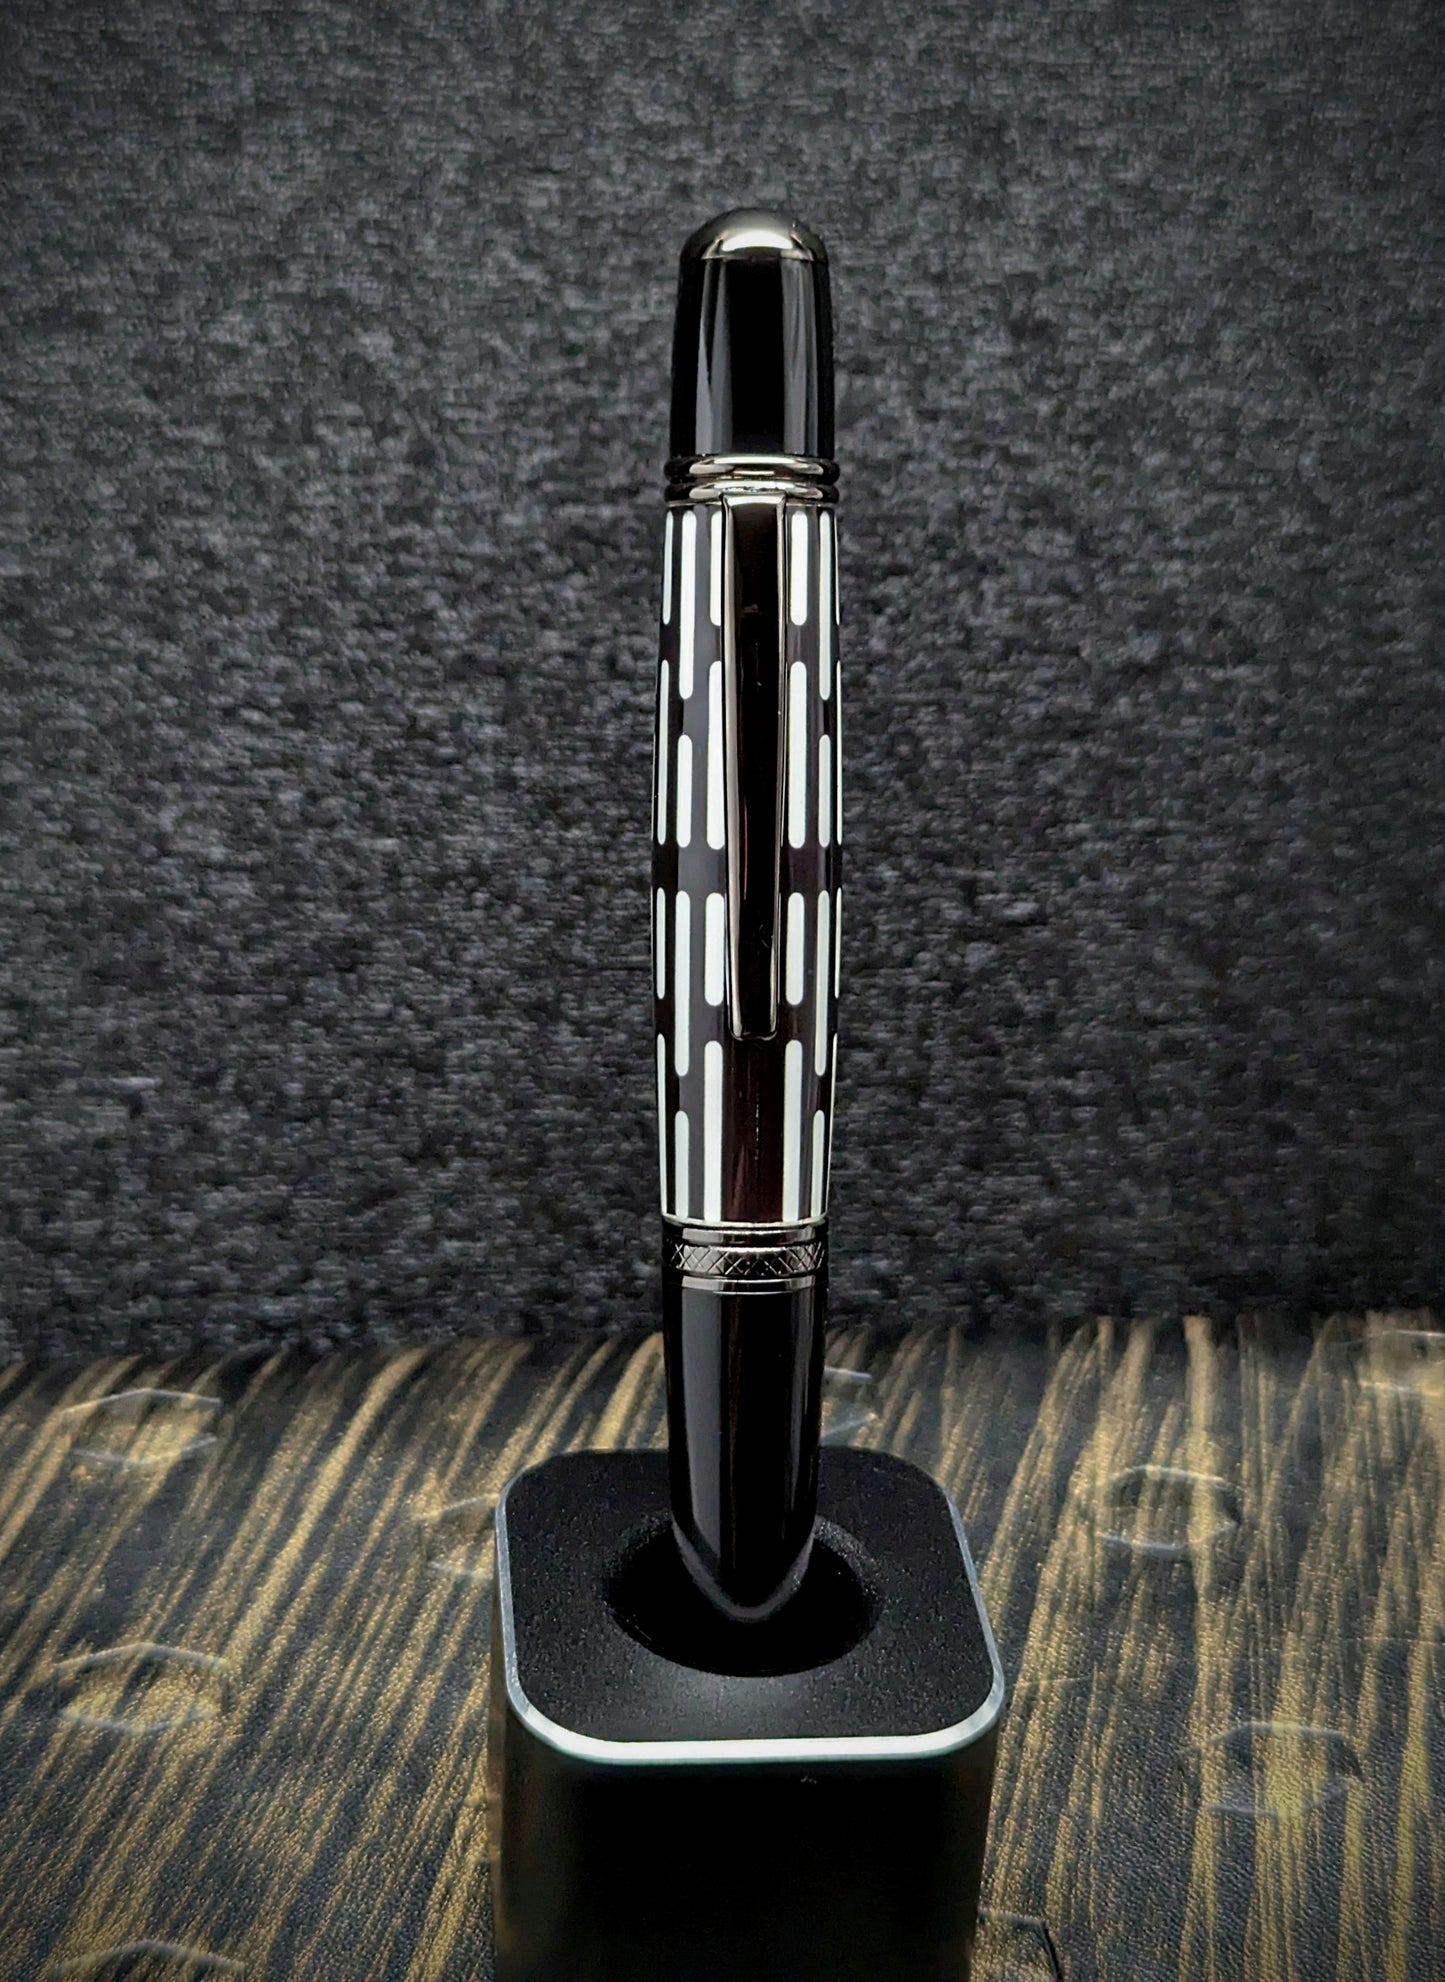 Galactic Empire Pen - With piece of the Death Star